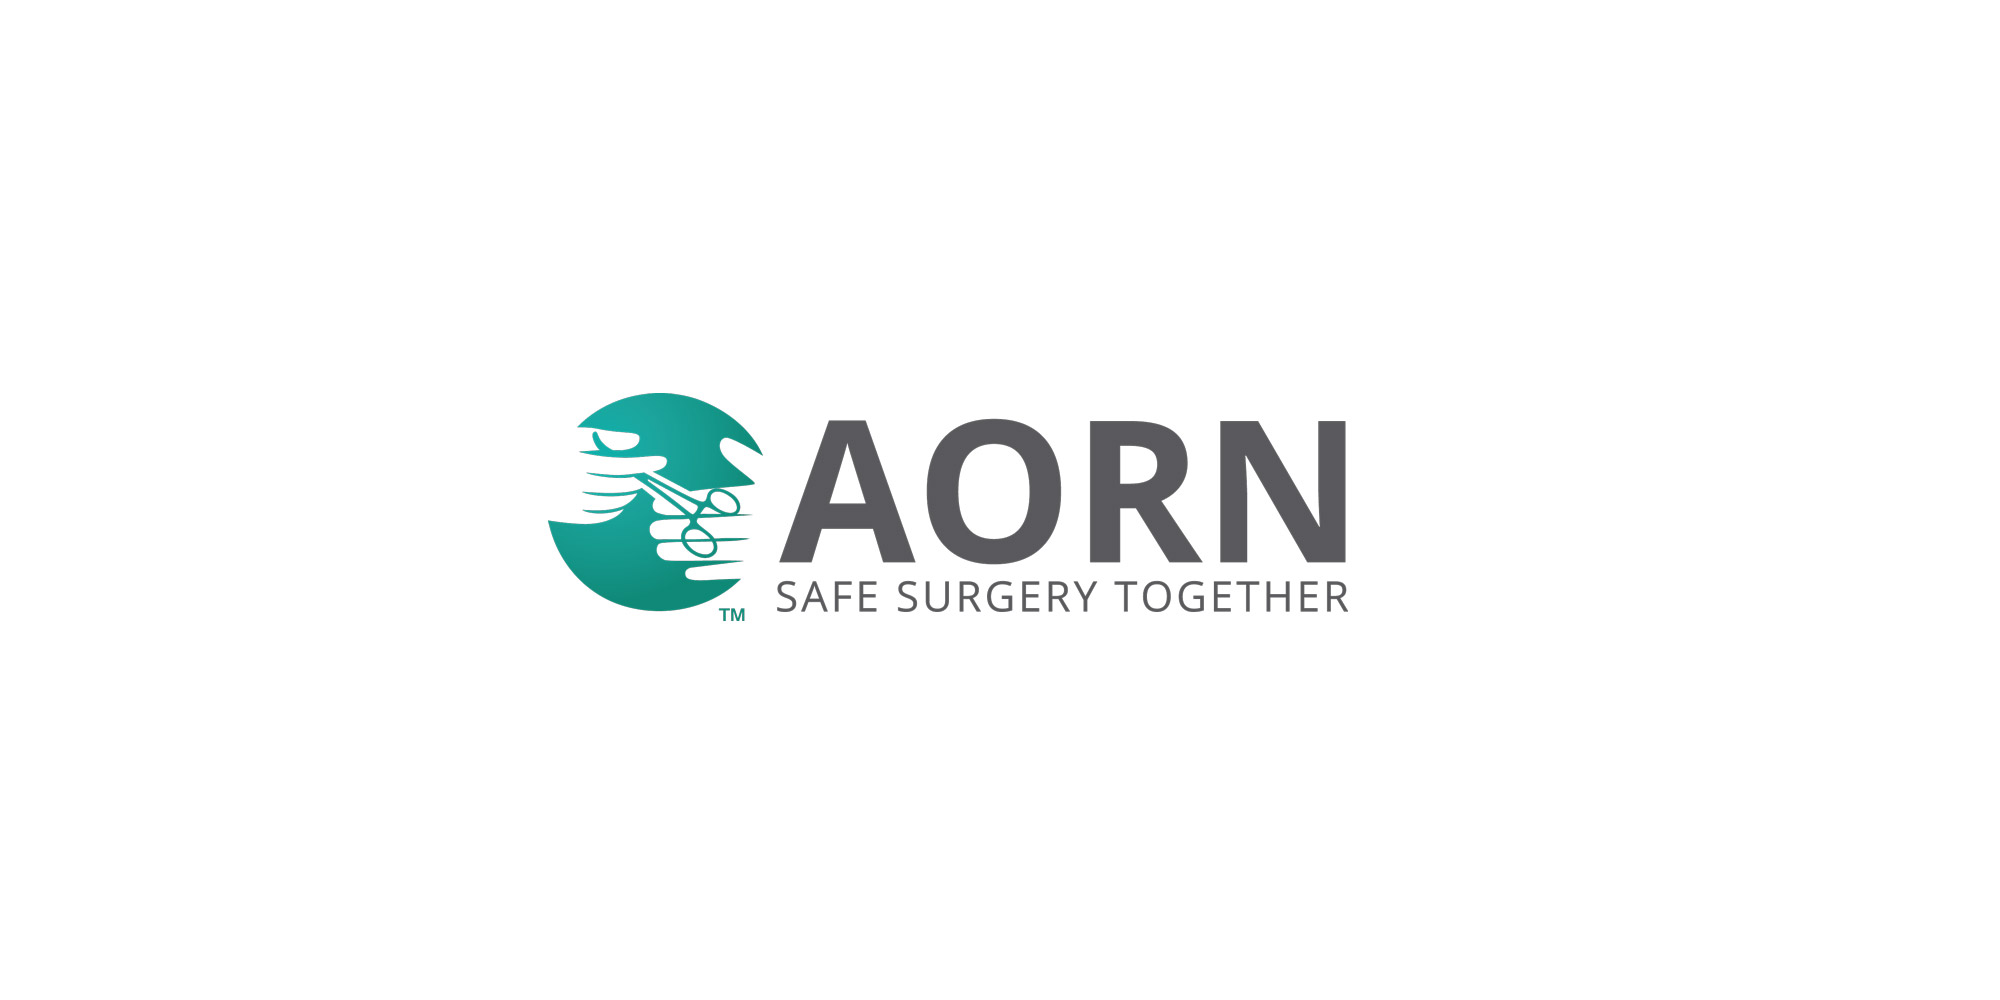 New AORN guidelines for reprocessing flexible endoscopes are designed to be achievable and to represent what is optimal.